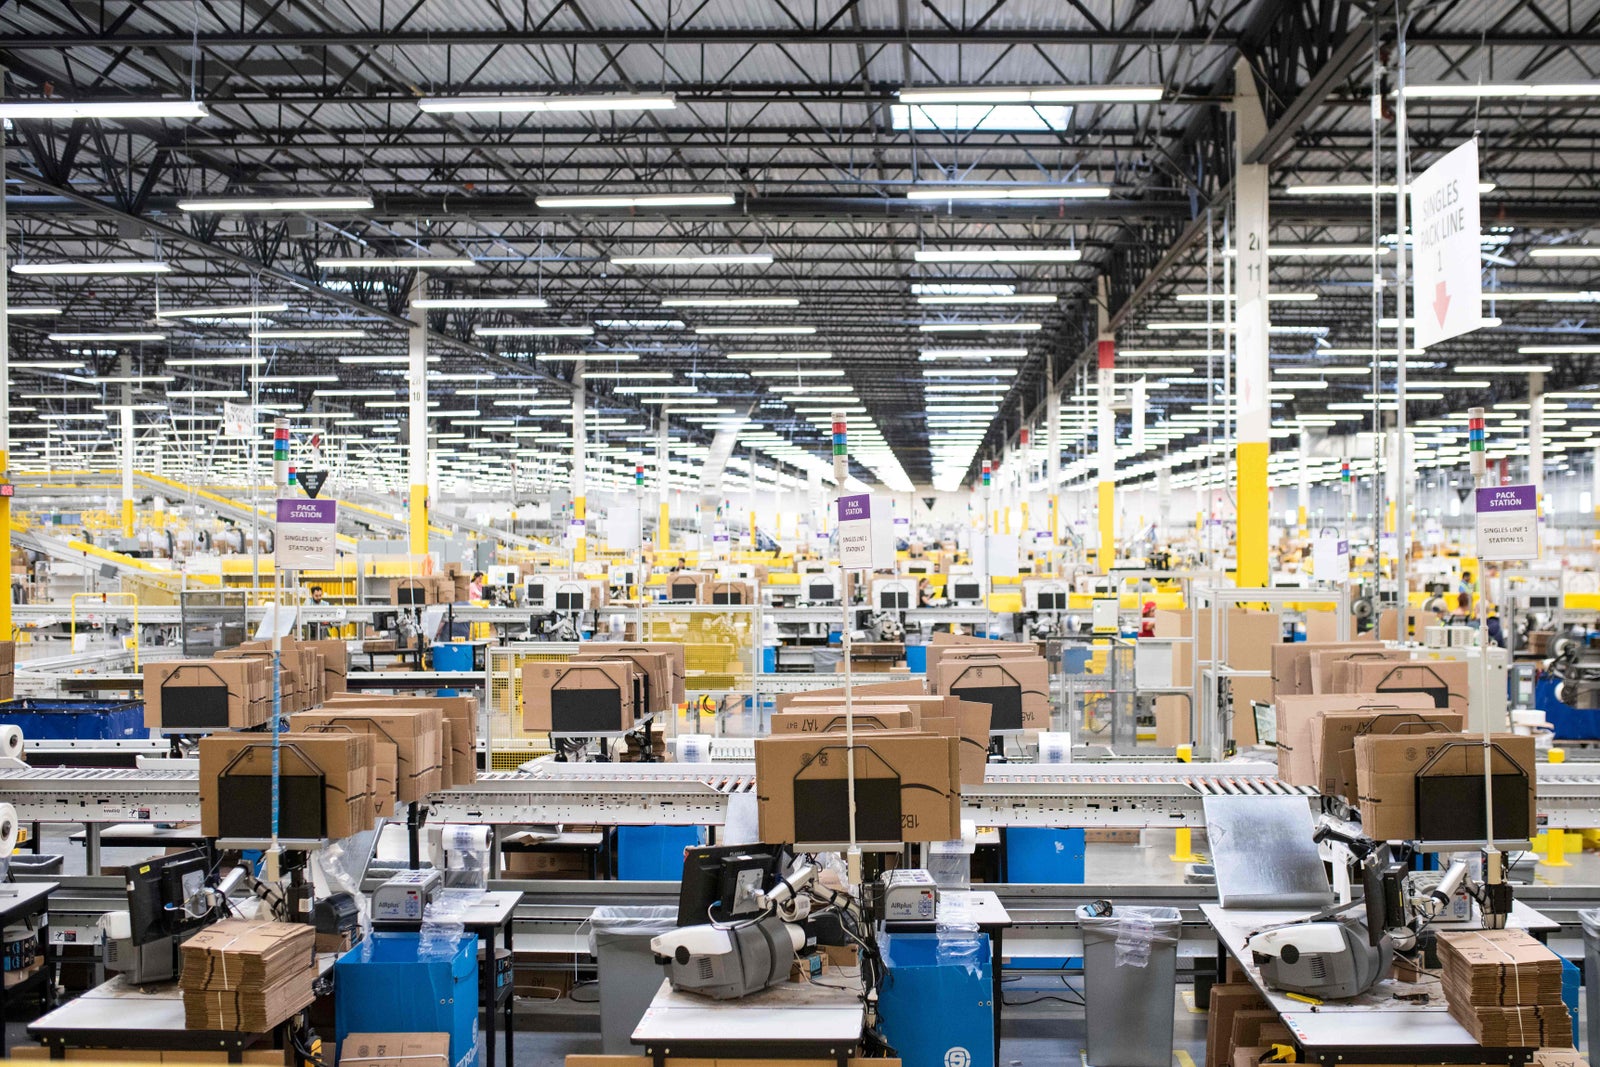 Amazon minimum wage increases to 15 per hour after months of pressure.